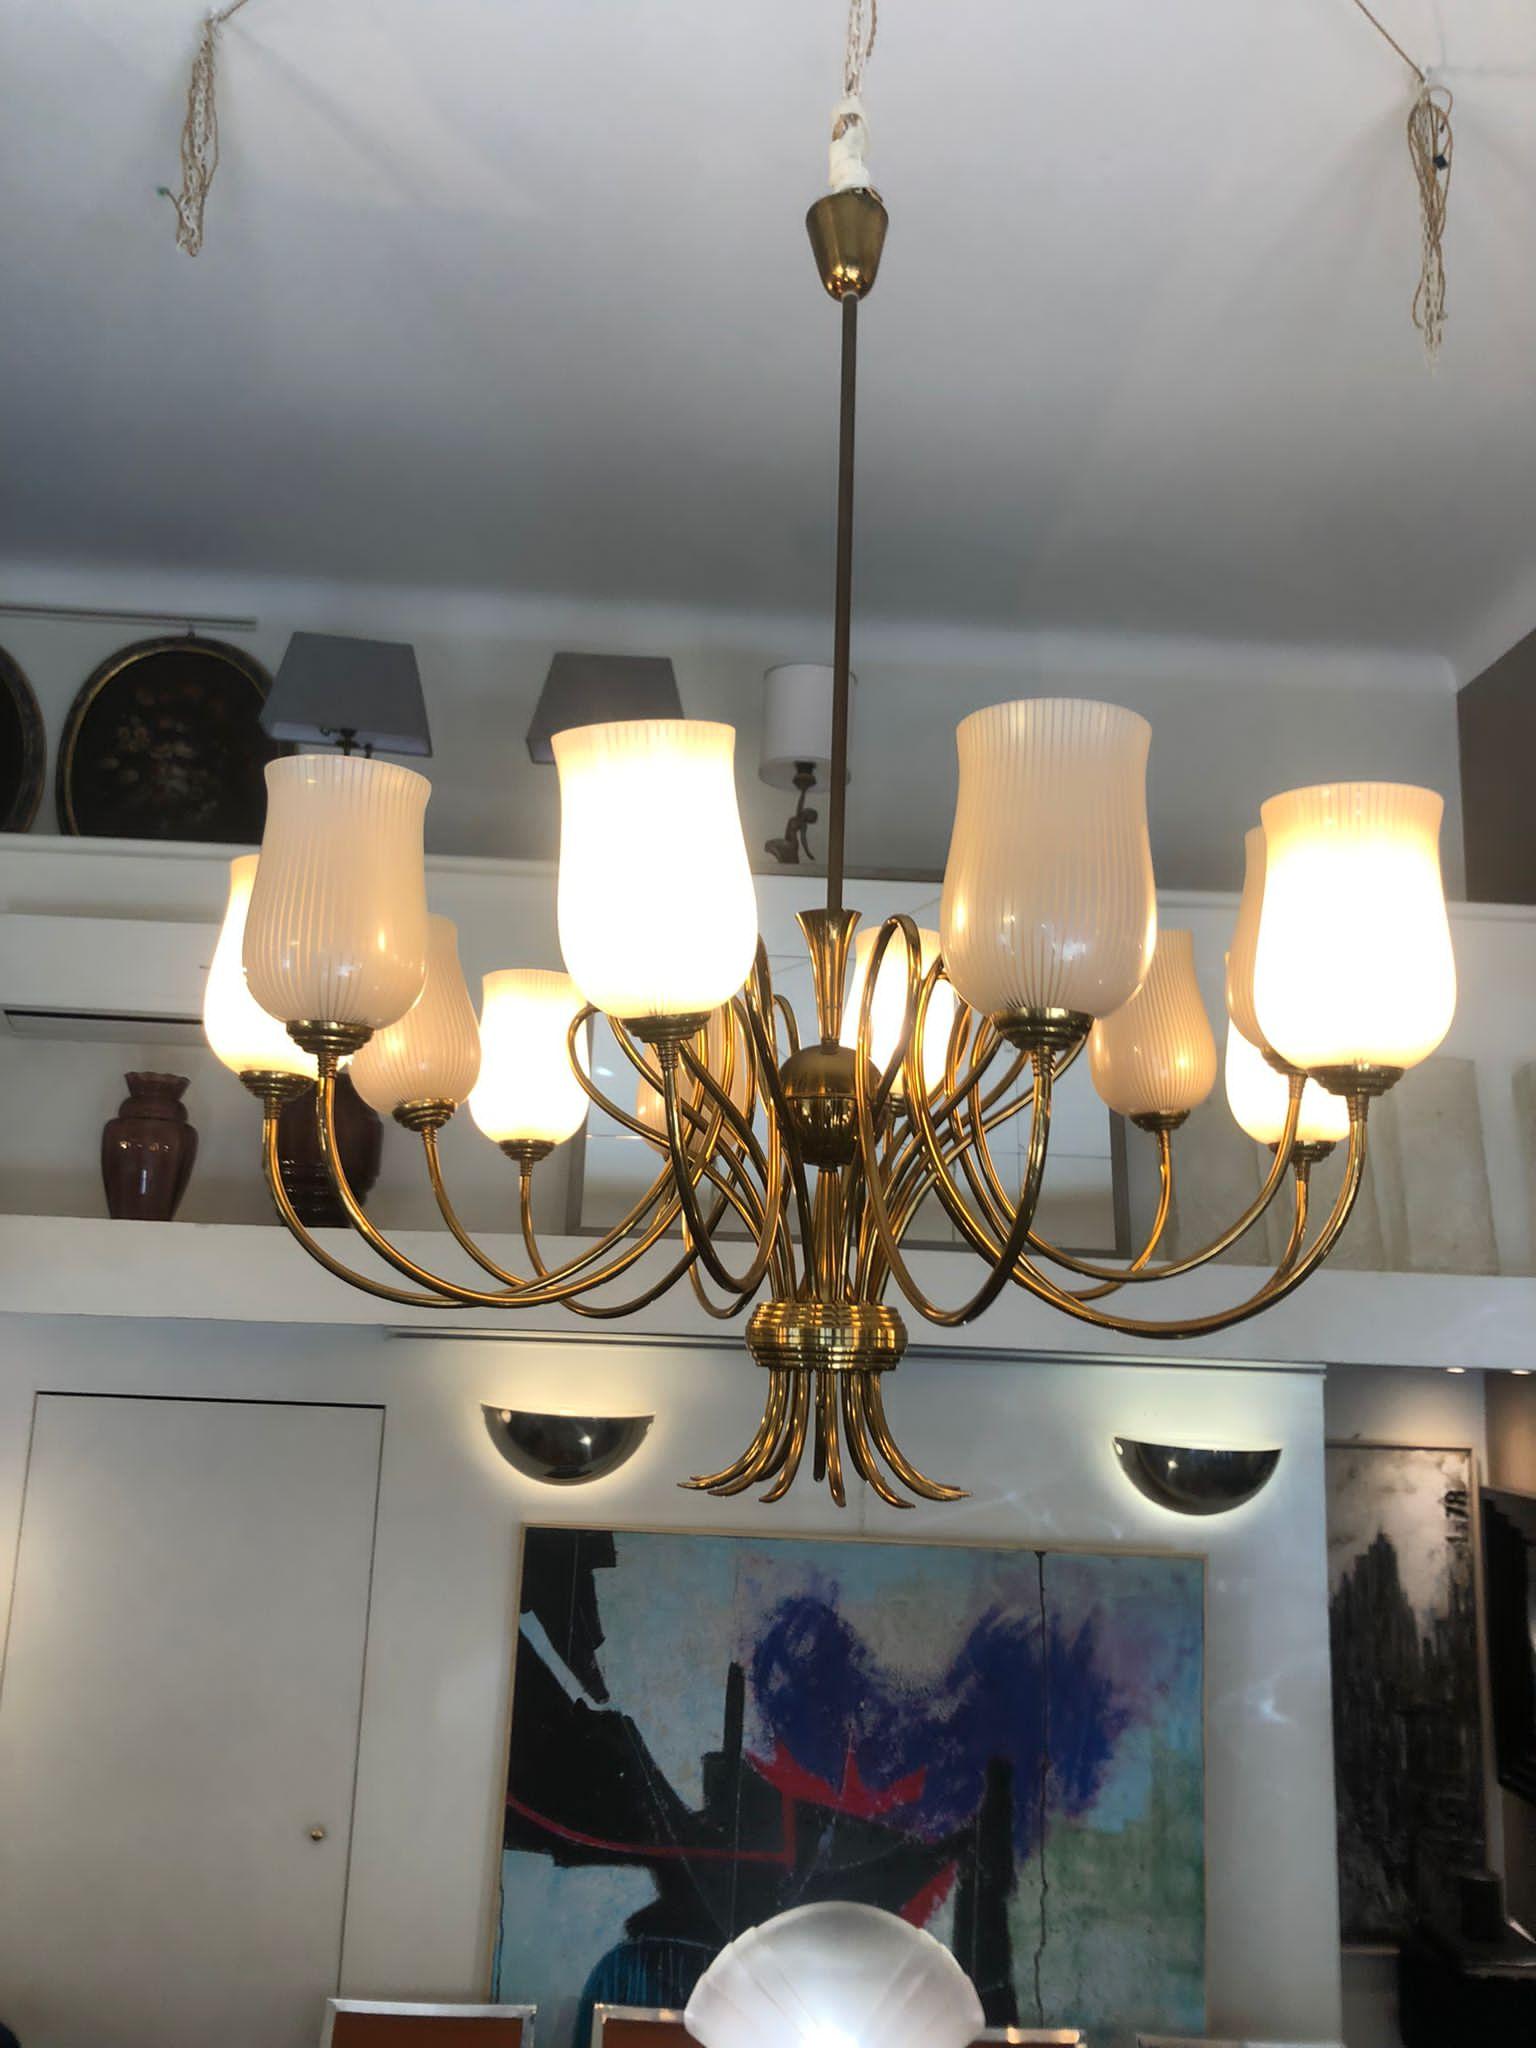 Venini 1940s brass arms and blown glass lampshades chandelier, attributed.
A chandelier with brass arms and 12 blown glass lamp shades for 12 lights.
Restored in conservative way, two lampshades were broken and they have been replaced with new